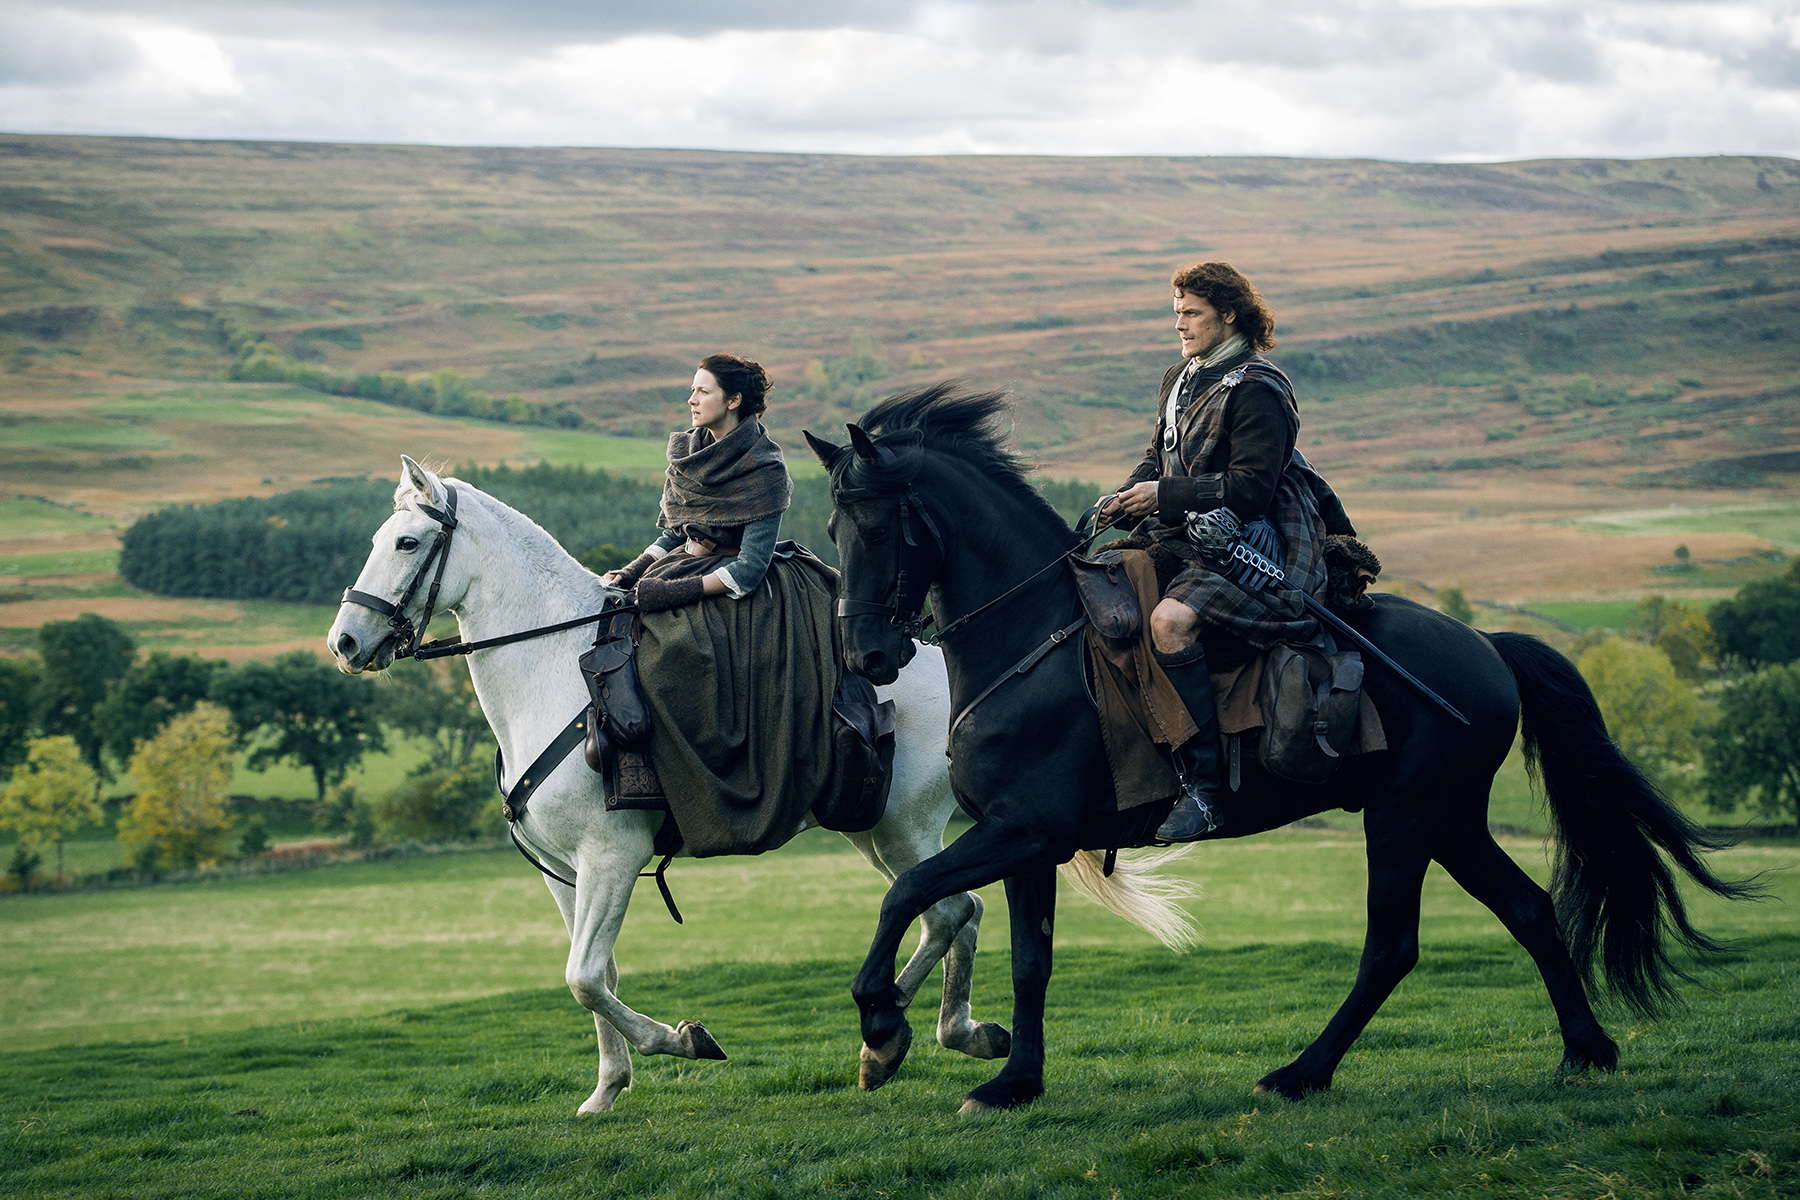 Above: Pretty people in the pretty Highlands. (Jamie and Claire riding across the countryside.)